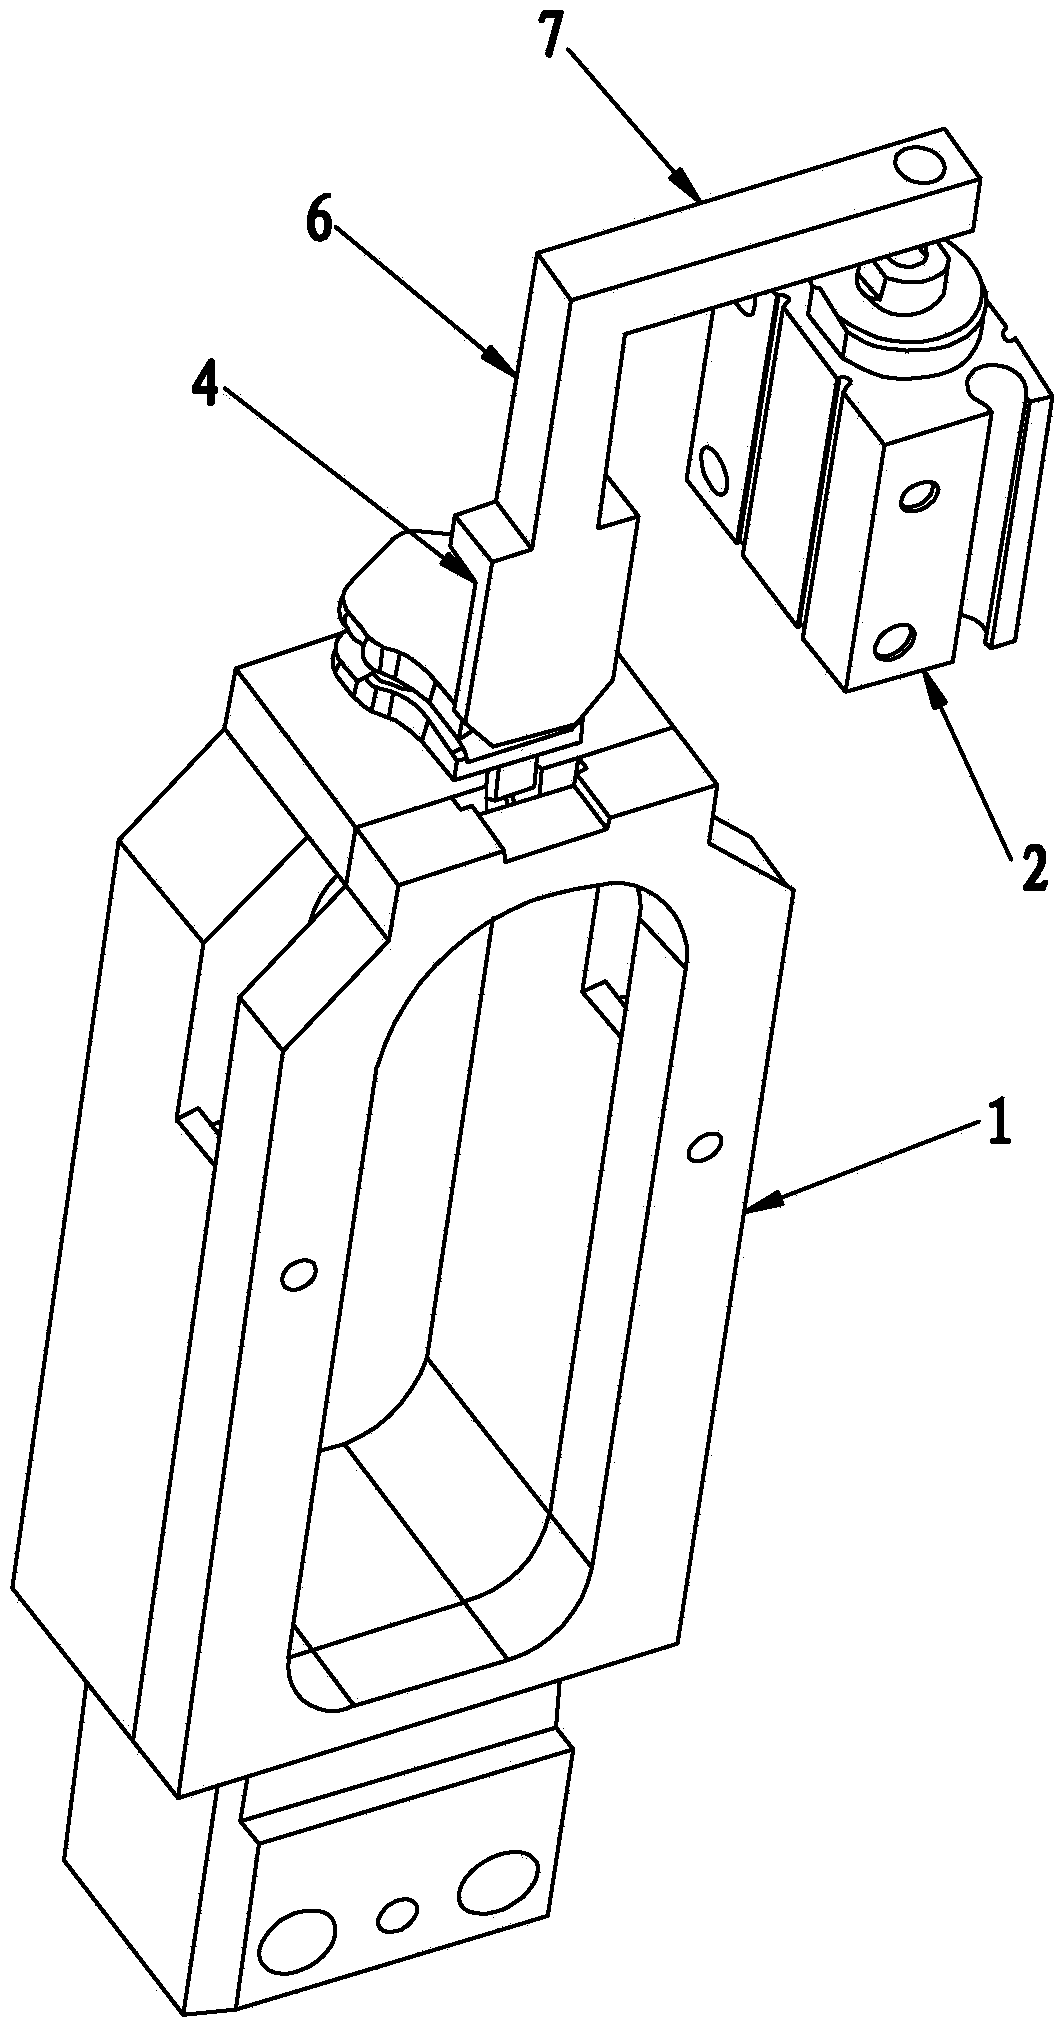 Strap splitting device arranged on zipper machine and used for zipper head installation